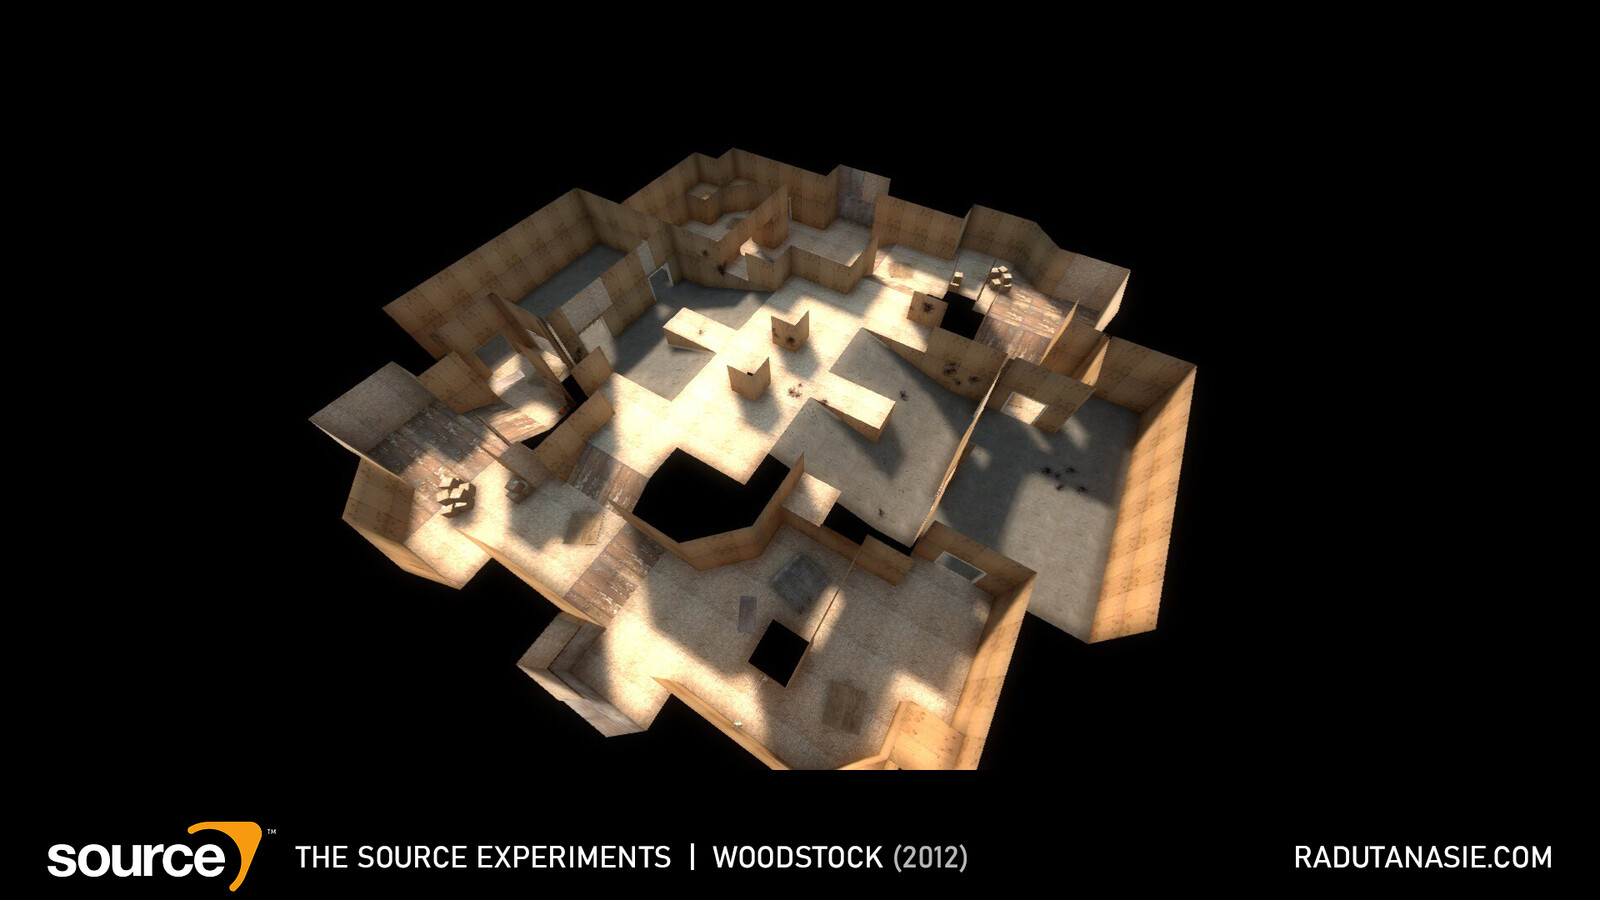 Possibly the first or second map I designed for Counter-Strike: Global Offensive. The inspiration came from a previous map for Counter-Strike: Source featuring plywood in a warehouse.